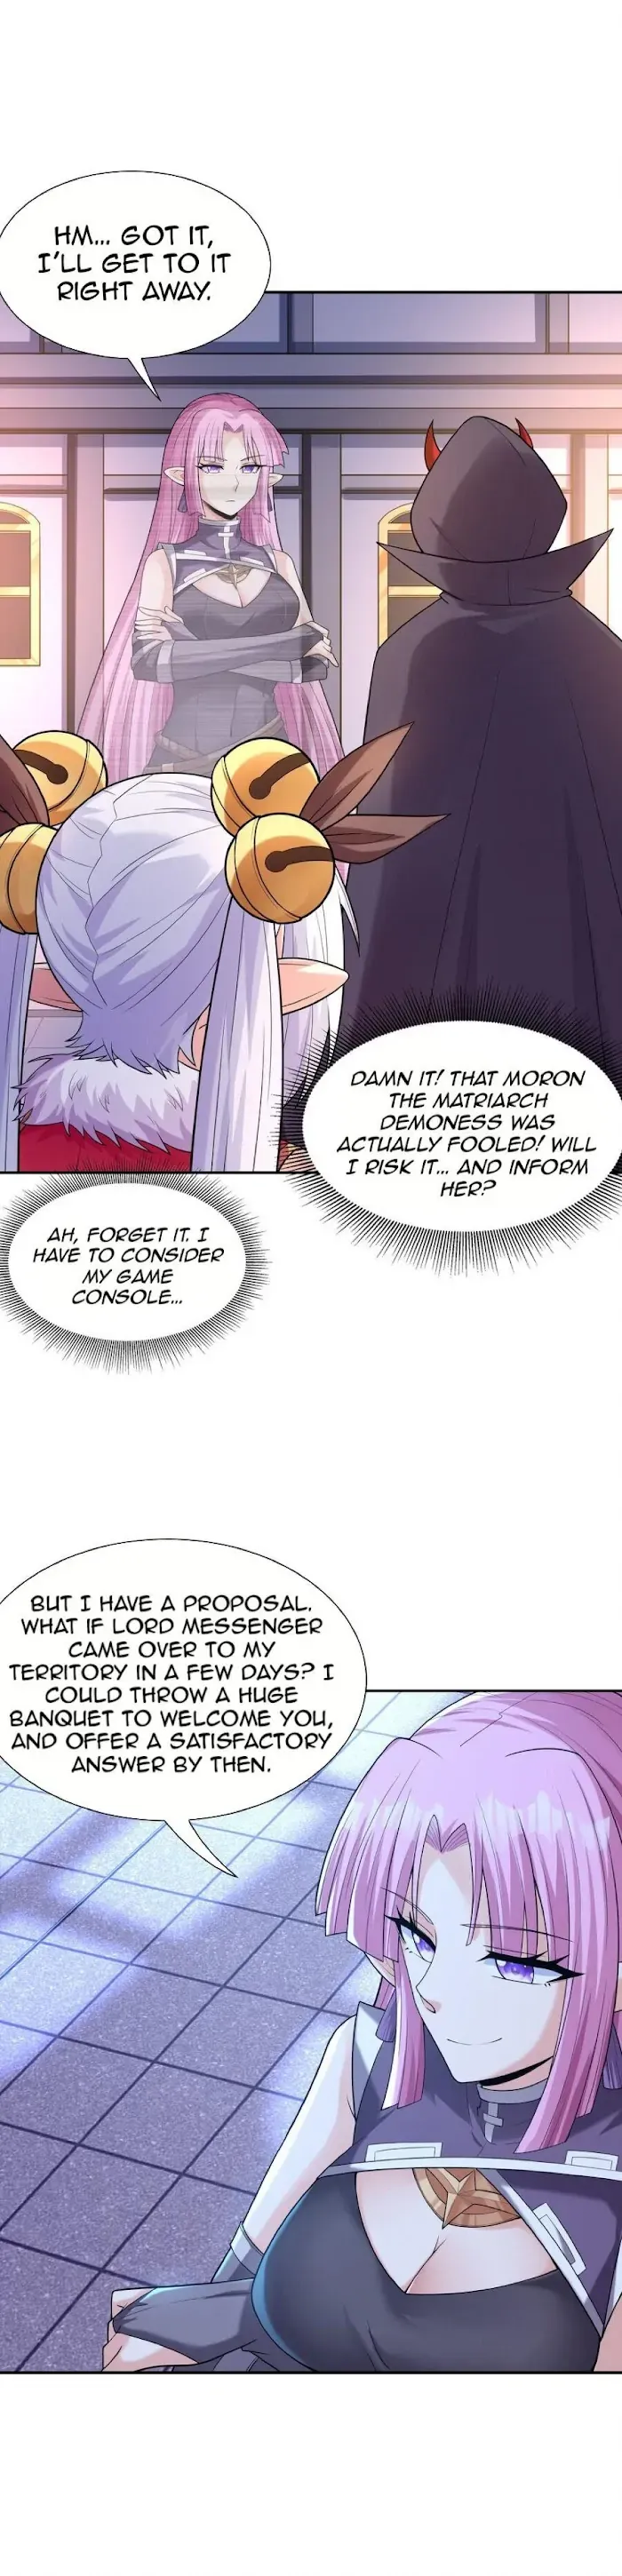 My Harem Consists Entirely of Female Demon Villains Chapter 47 page 16